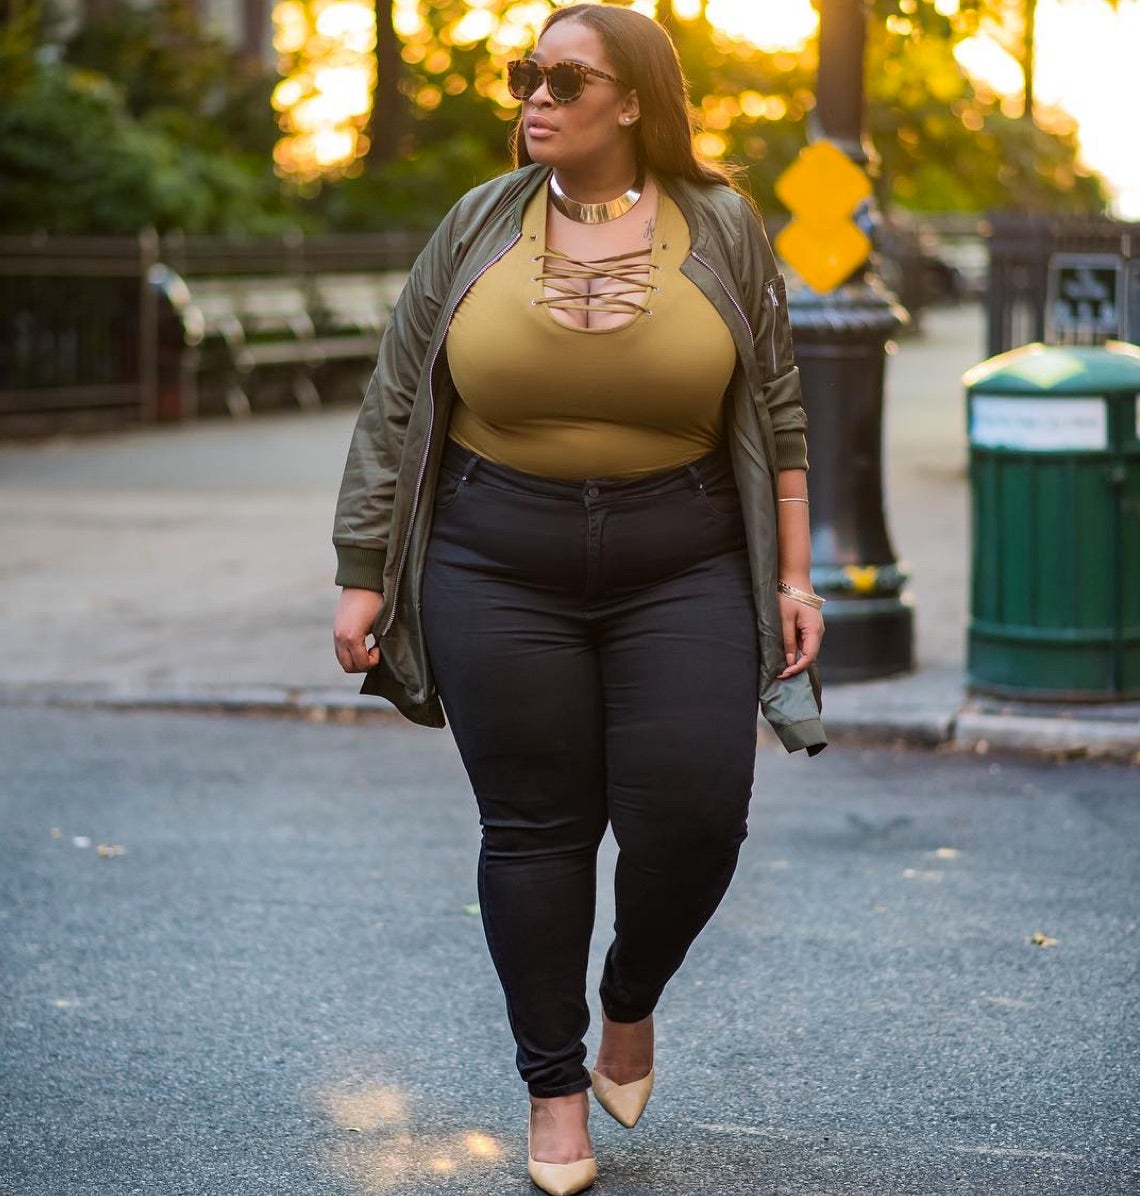 Get Major Fall Fashion Inspiration From These Fierce Curvy